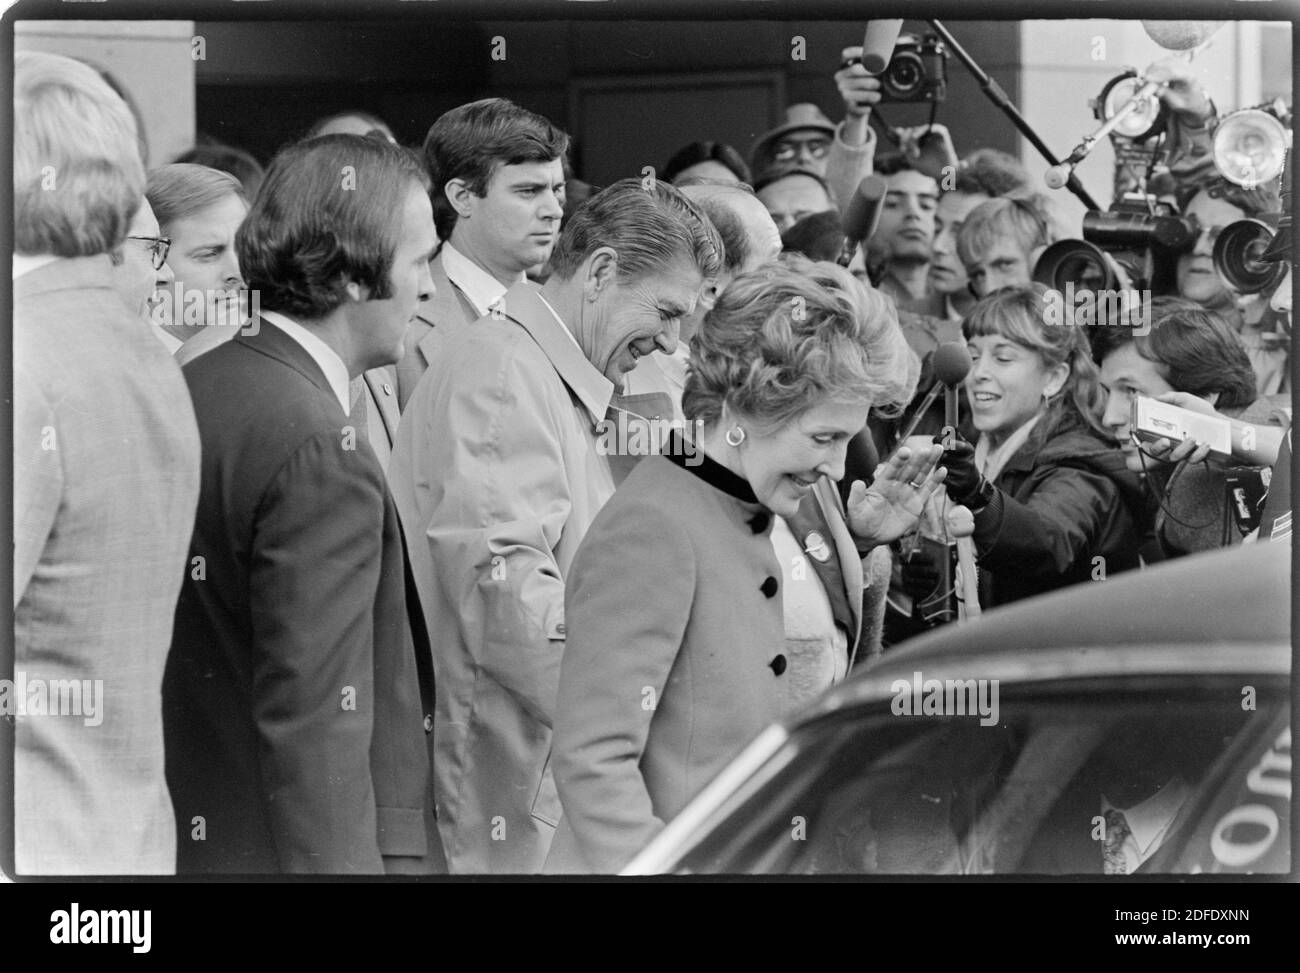 Presidential candidate Ronald Reagan and his wife Nancy depart the Stouffer Hotel in Cleveland on Oct. 29, 1980 after the debate with President Jimmy Carter in Cleveland the night before. Ernie Mastroianni photo Stock Photo